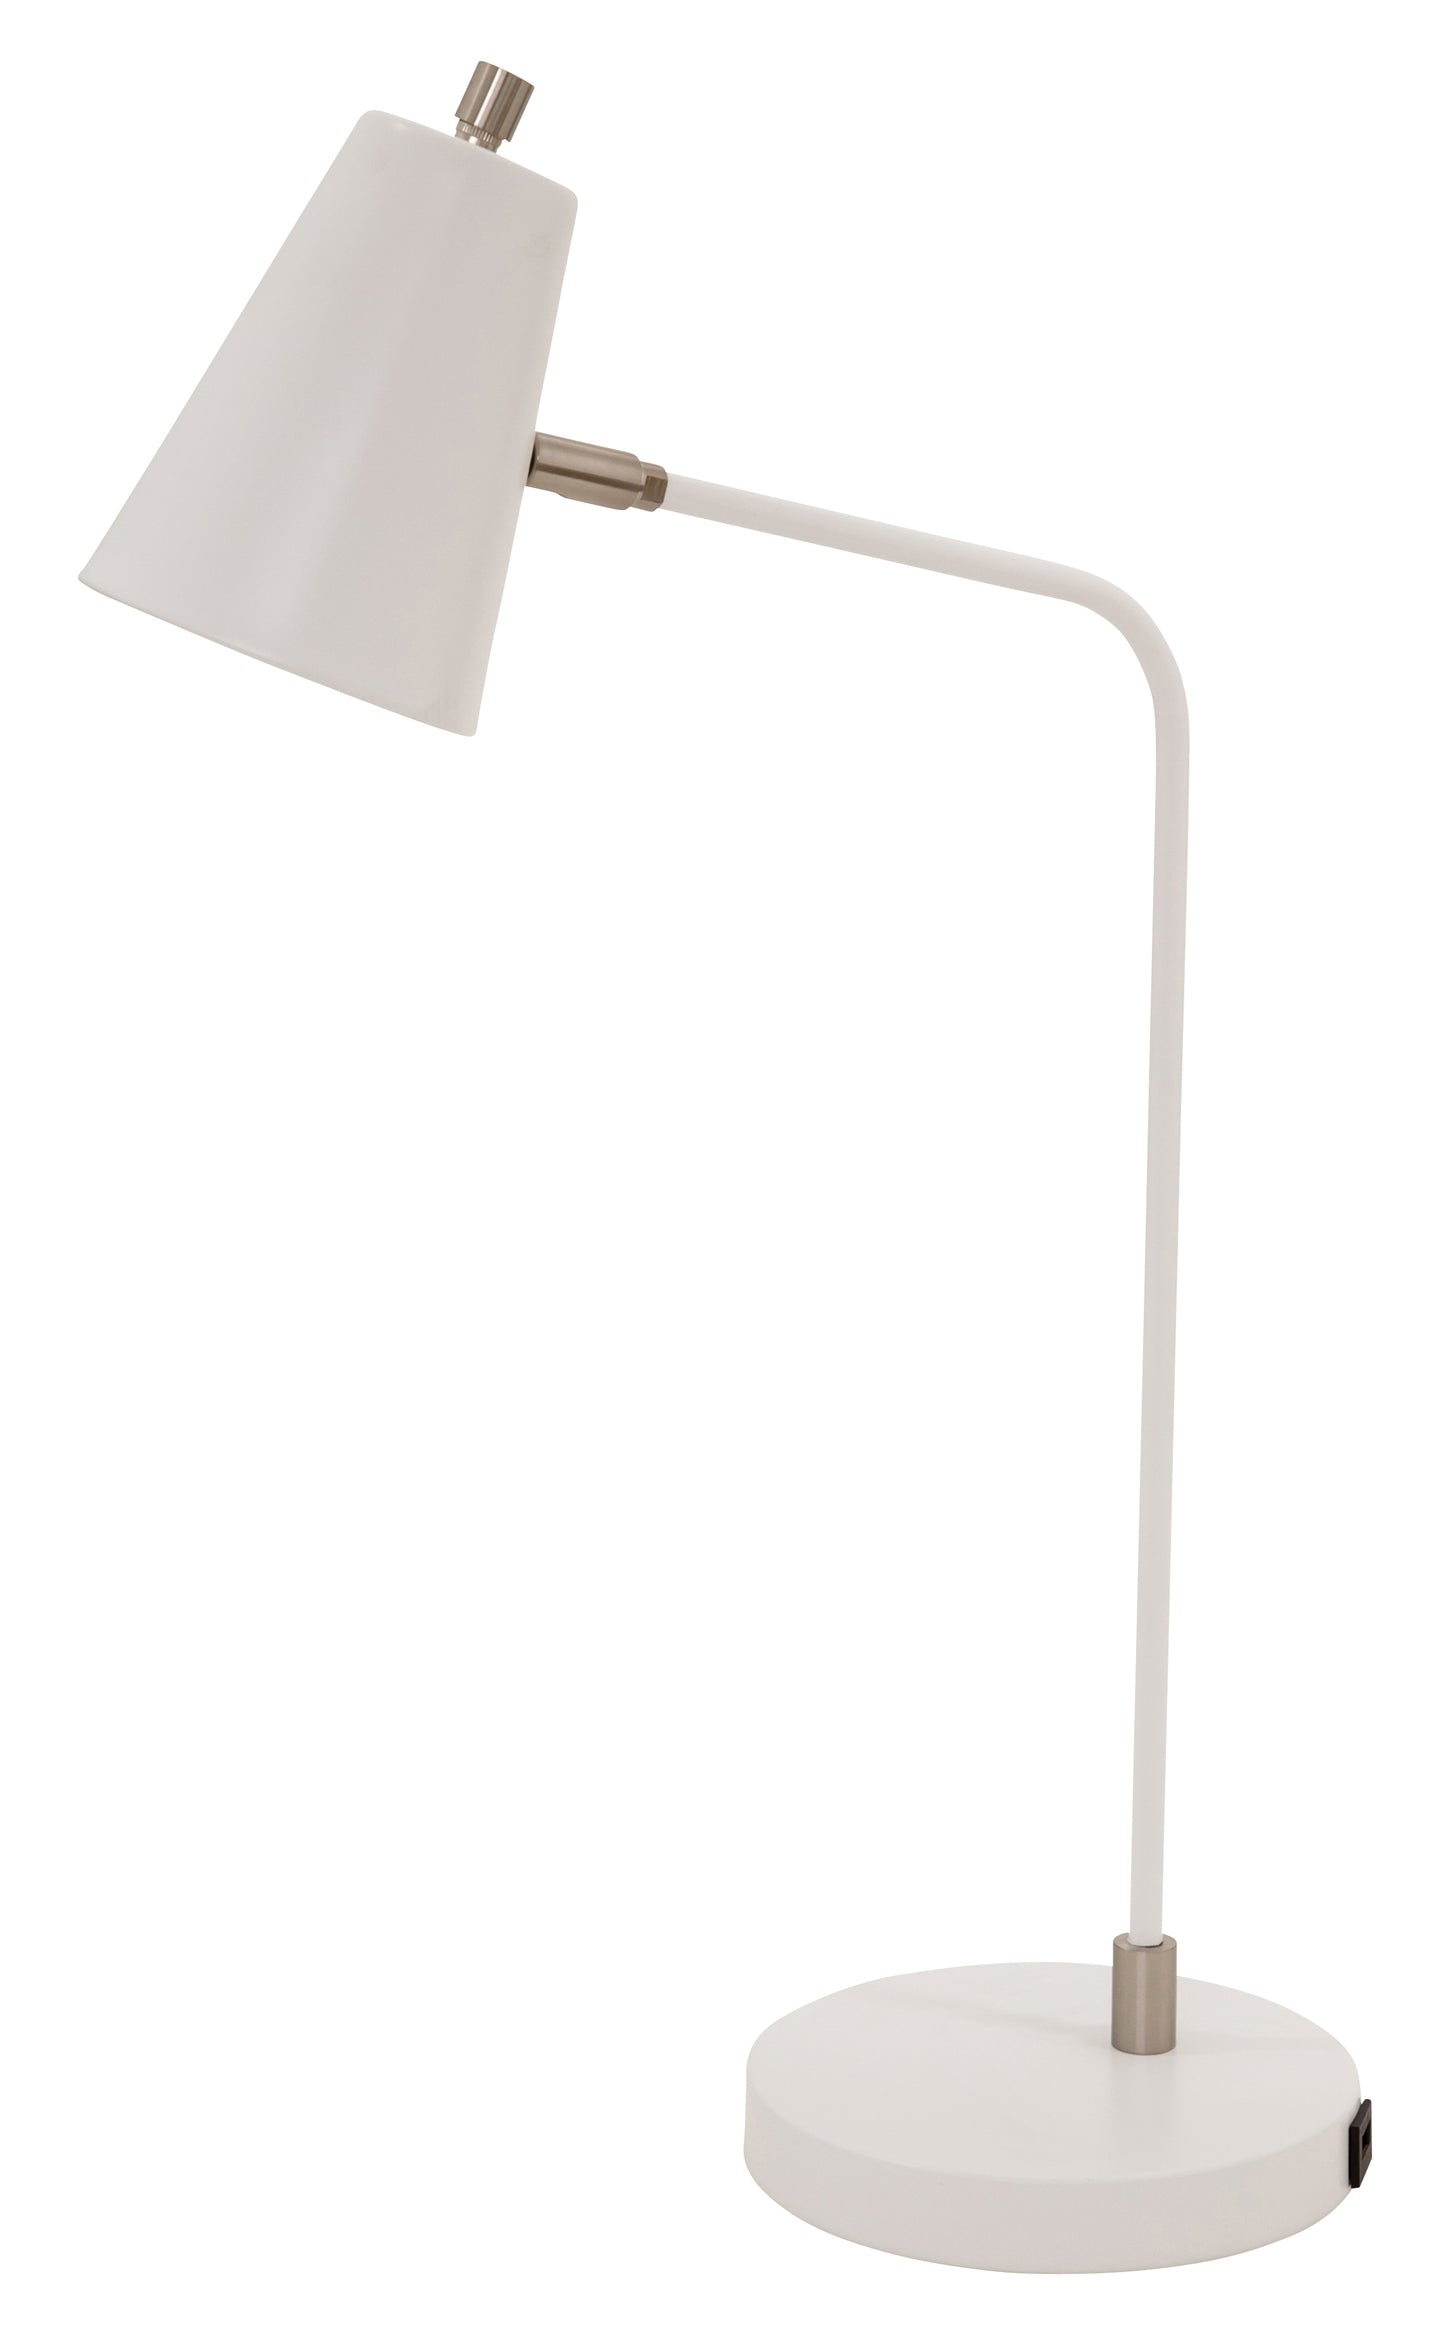 House of Troy Kirby LED task lamp in white with satin nickel accents and USB port K150-WT